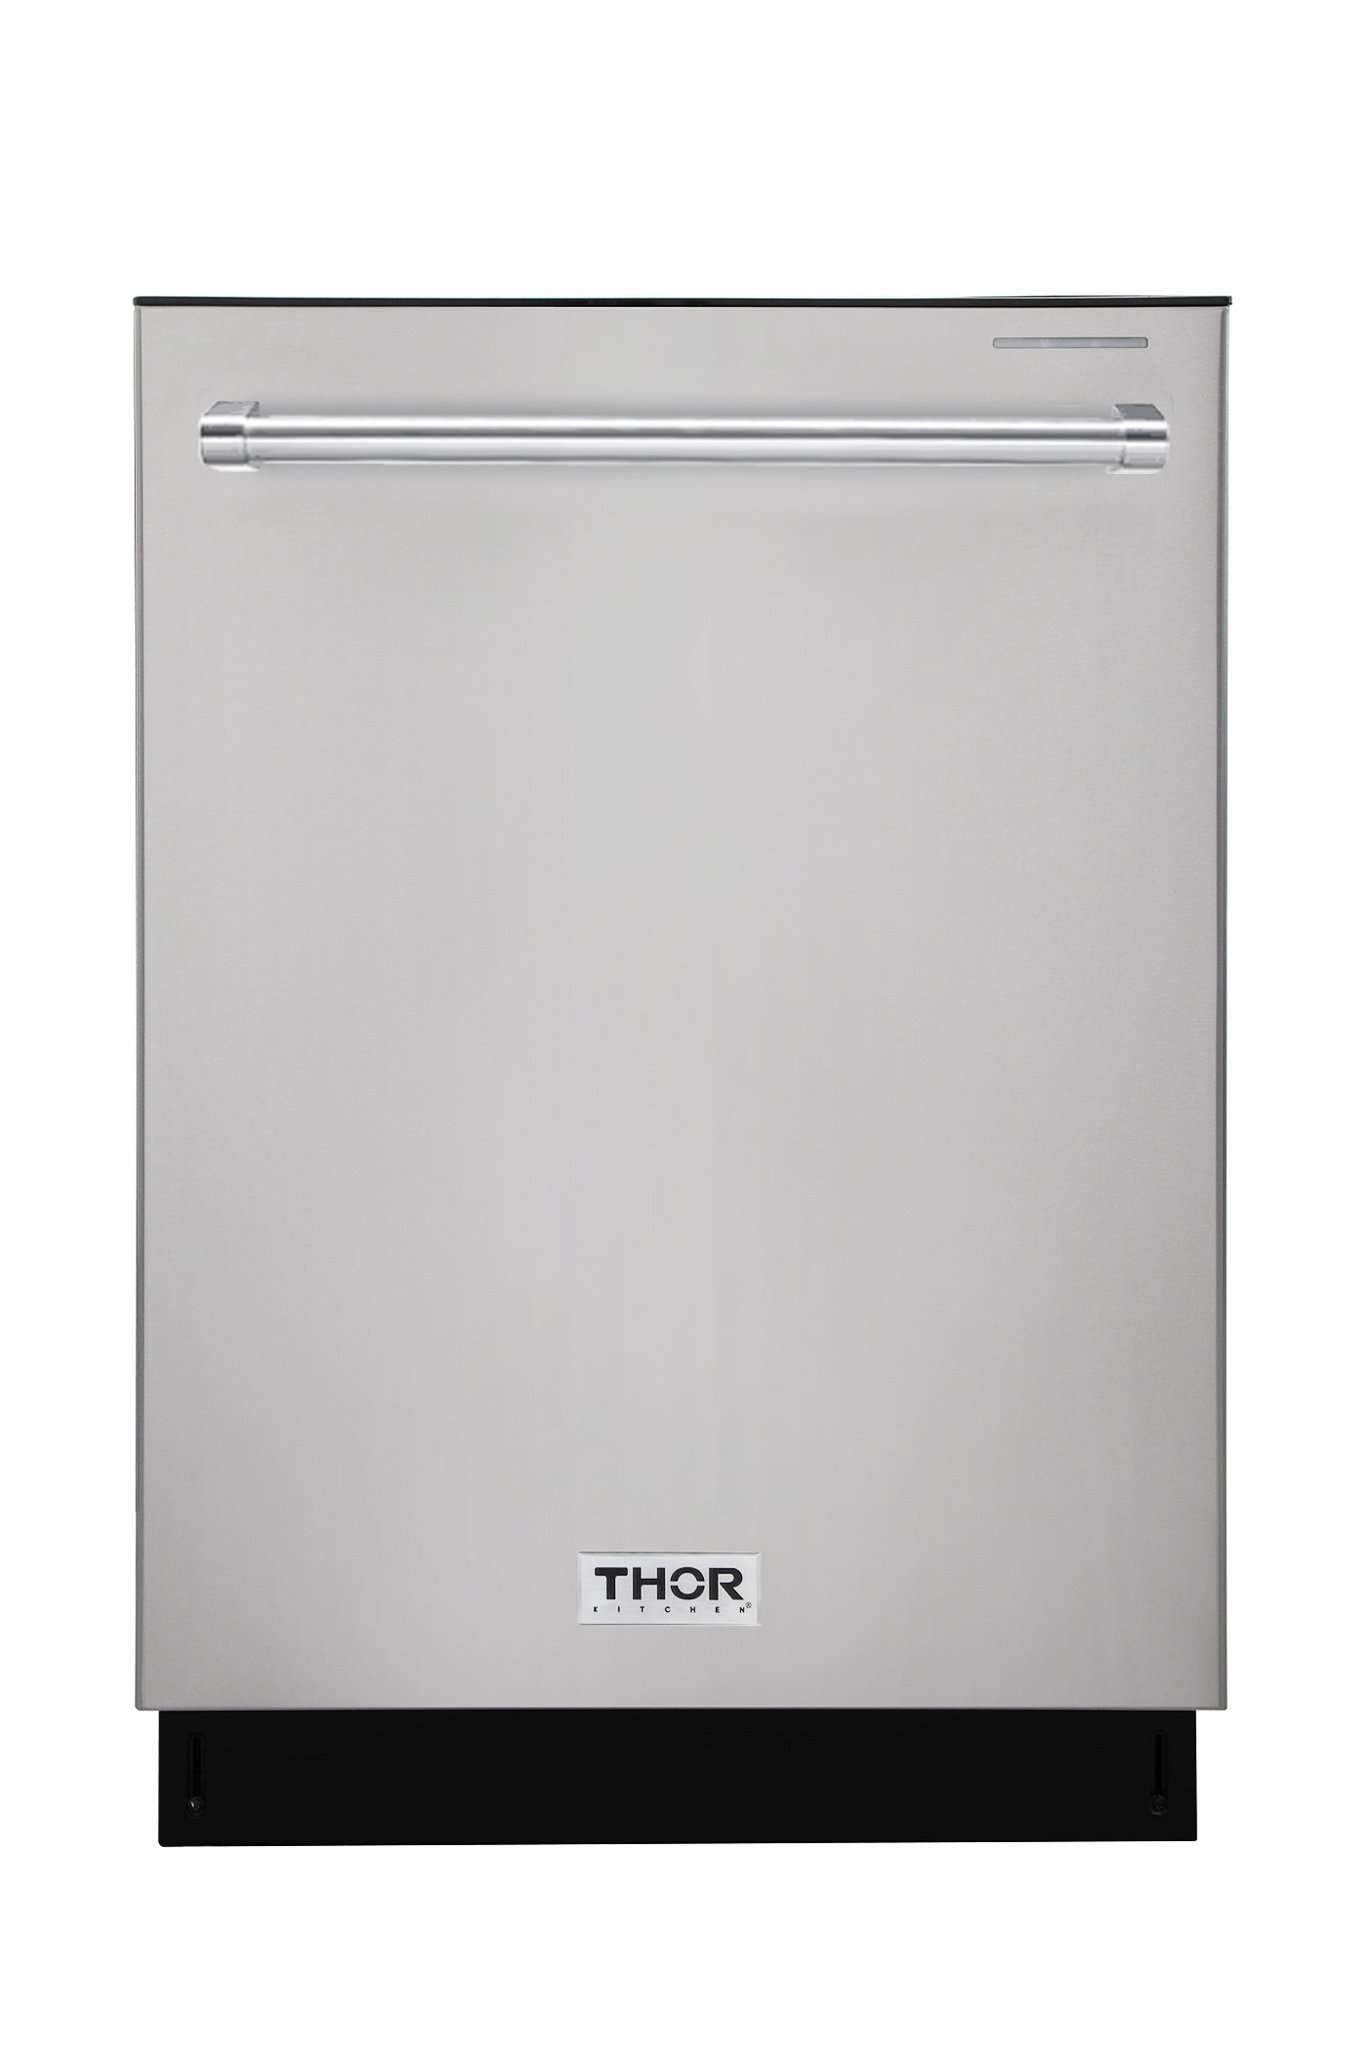 Thor Kitchen 3-Piece Appliance Package - 30-Inch Gas Range, Refrigerator with Water Dispenser, and Dishwasher in Stainless Steel